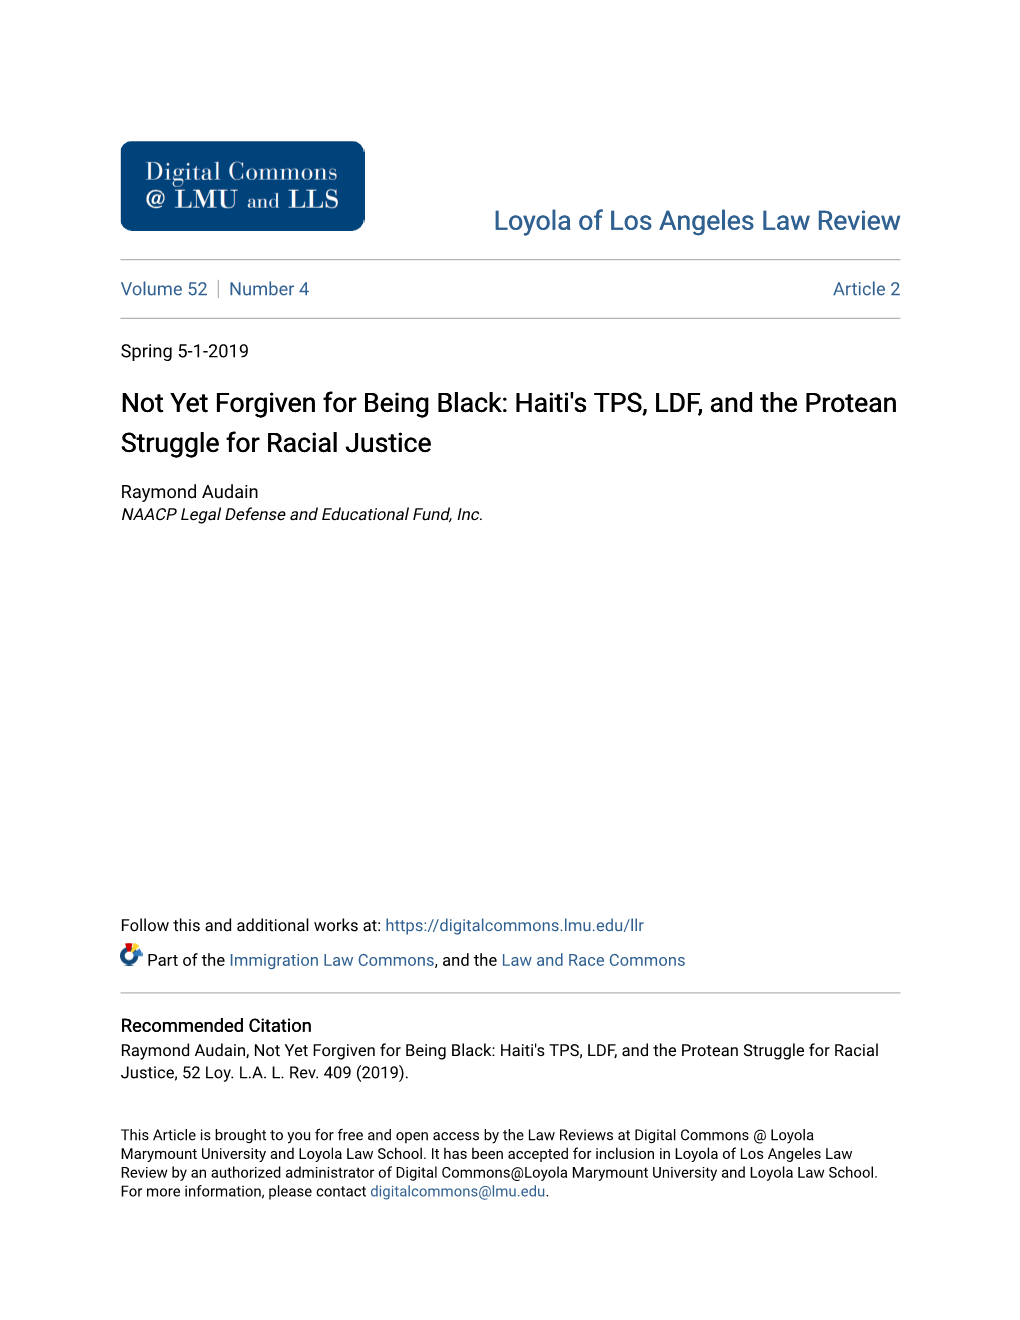 Not Yet Forgiven for Being Black: Haiti's TPS, LDF, and the Protean Struggle for Racial Justice